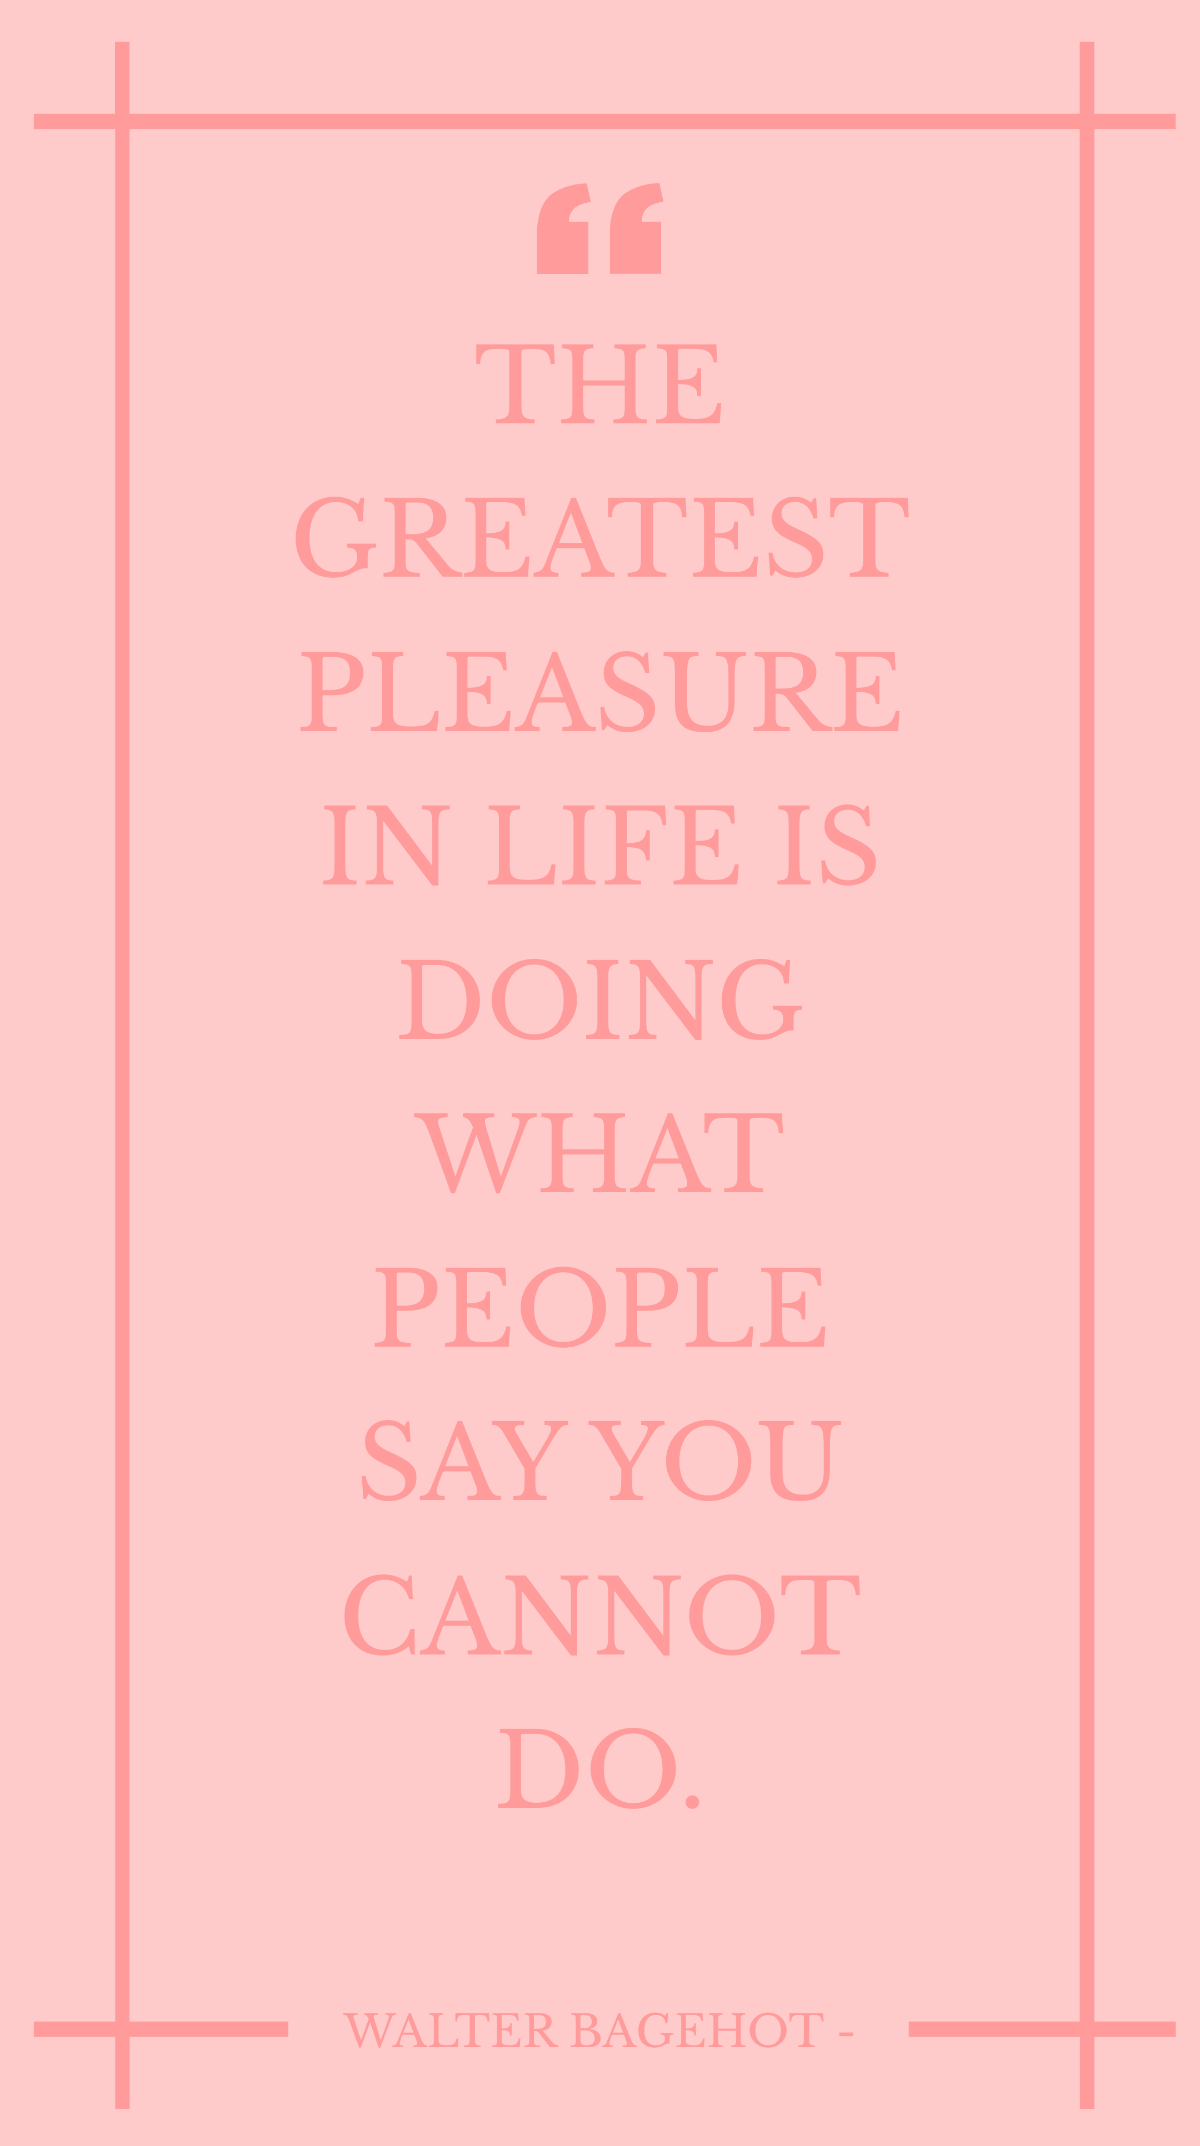 Walter Bagehot - The greatest pleasure in life is doing what people say you cannot do. Template